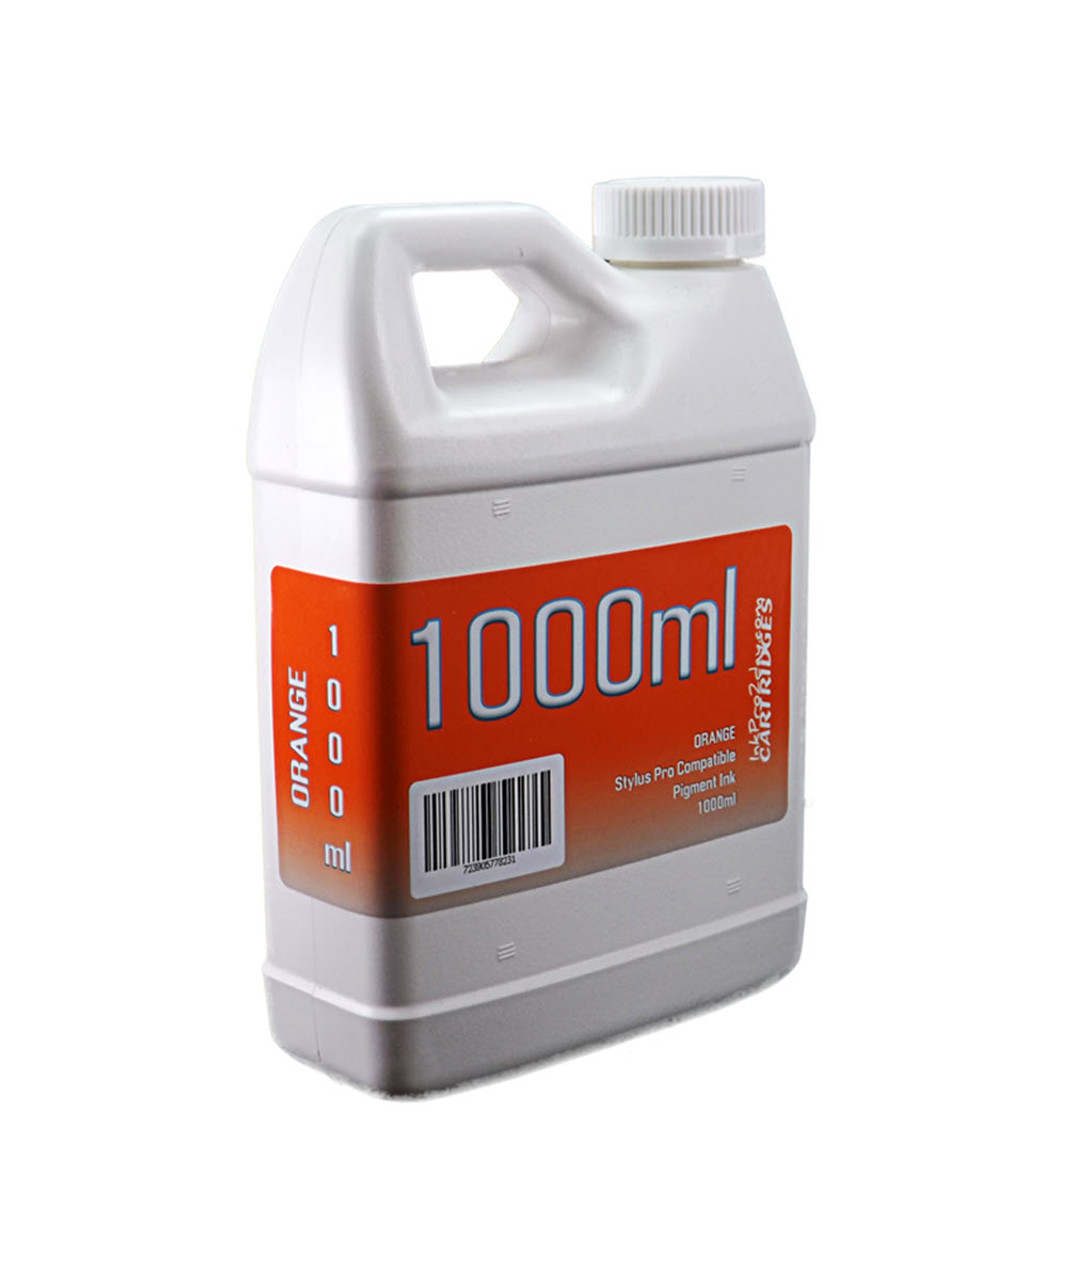 Orange 1000ml Bottle Compatible UltraChrome HDR Pigment Ink for Epson Stylus Pro 7900 9900 Printers